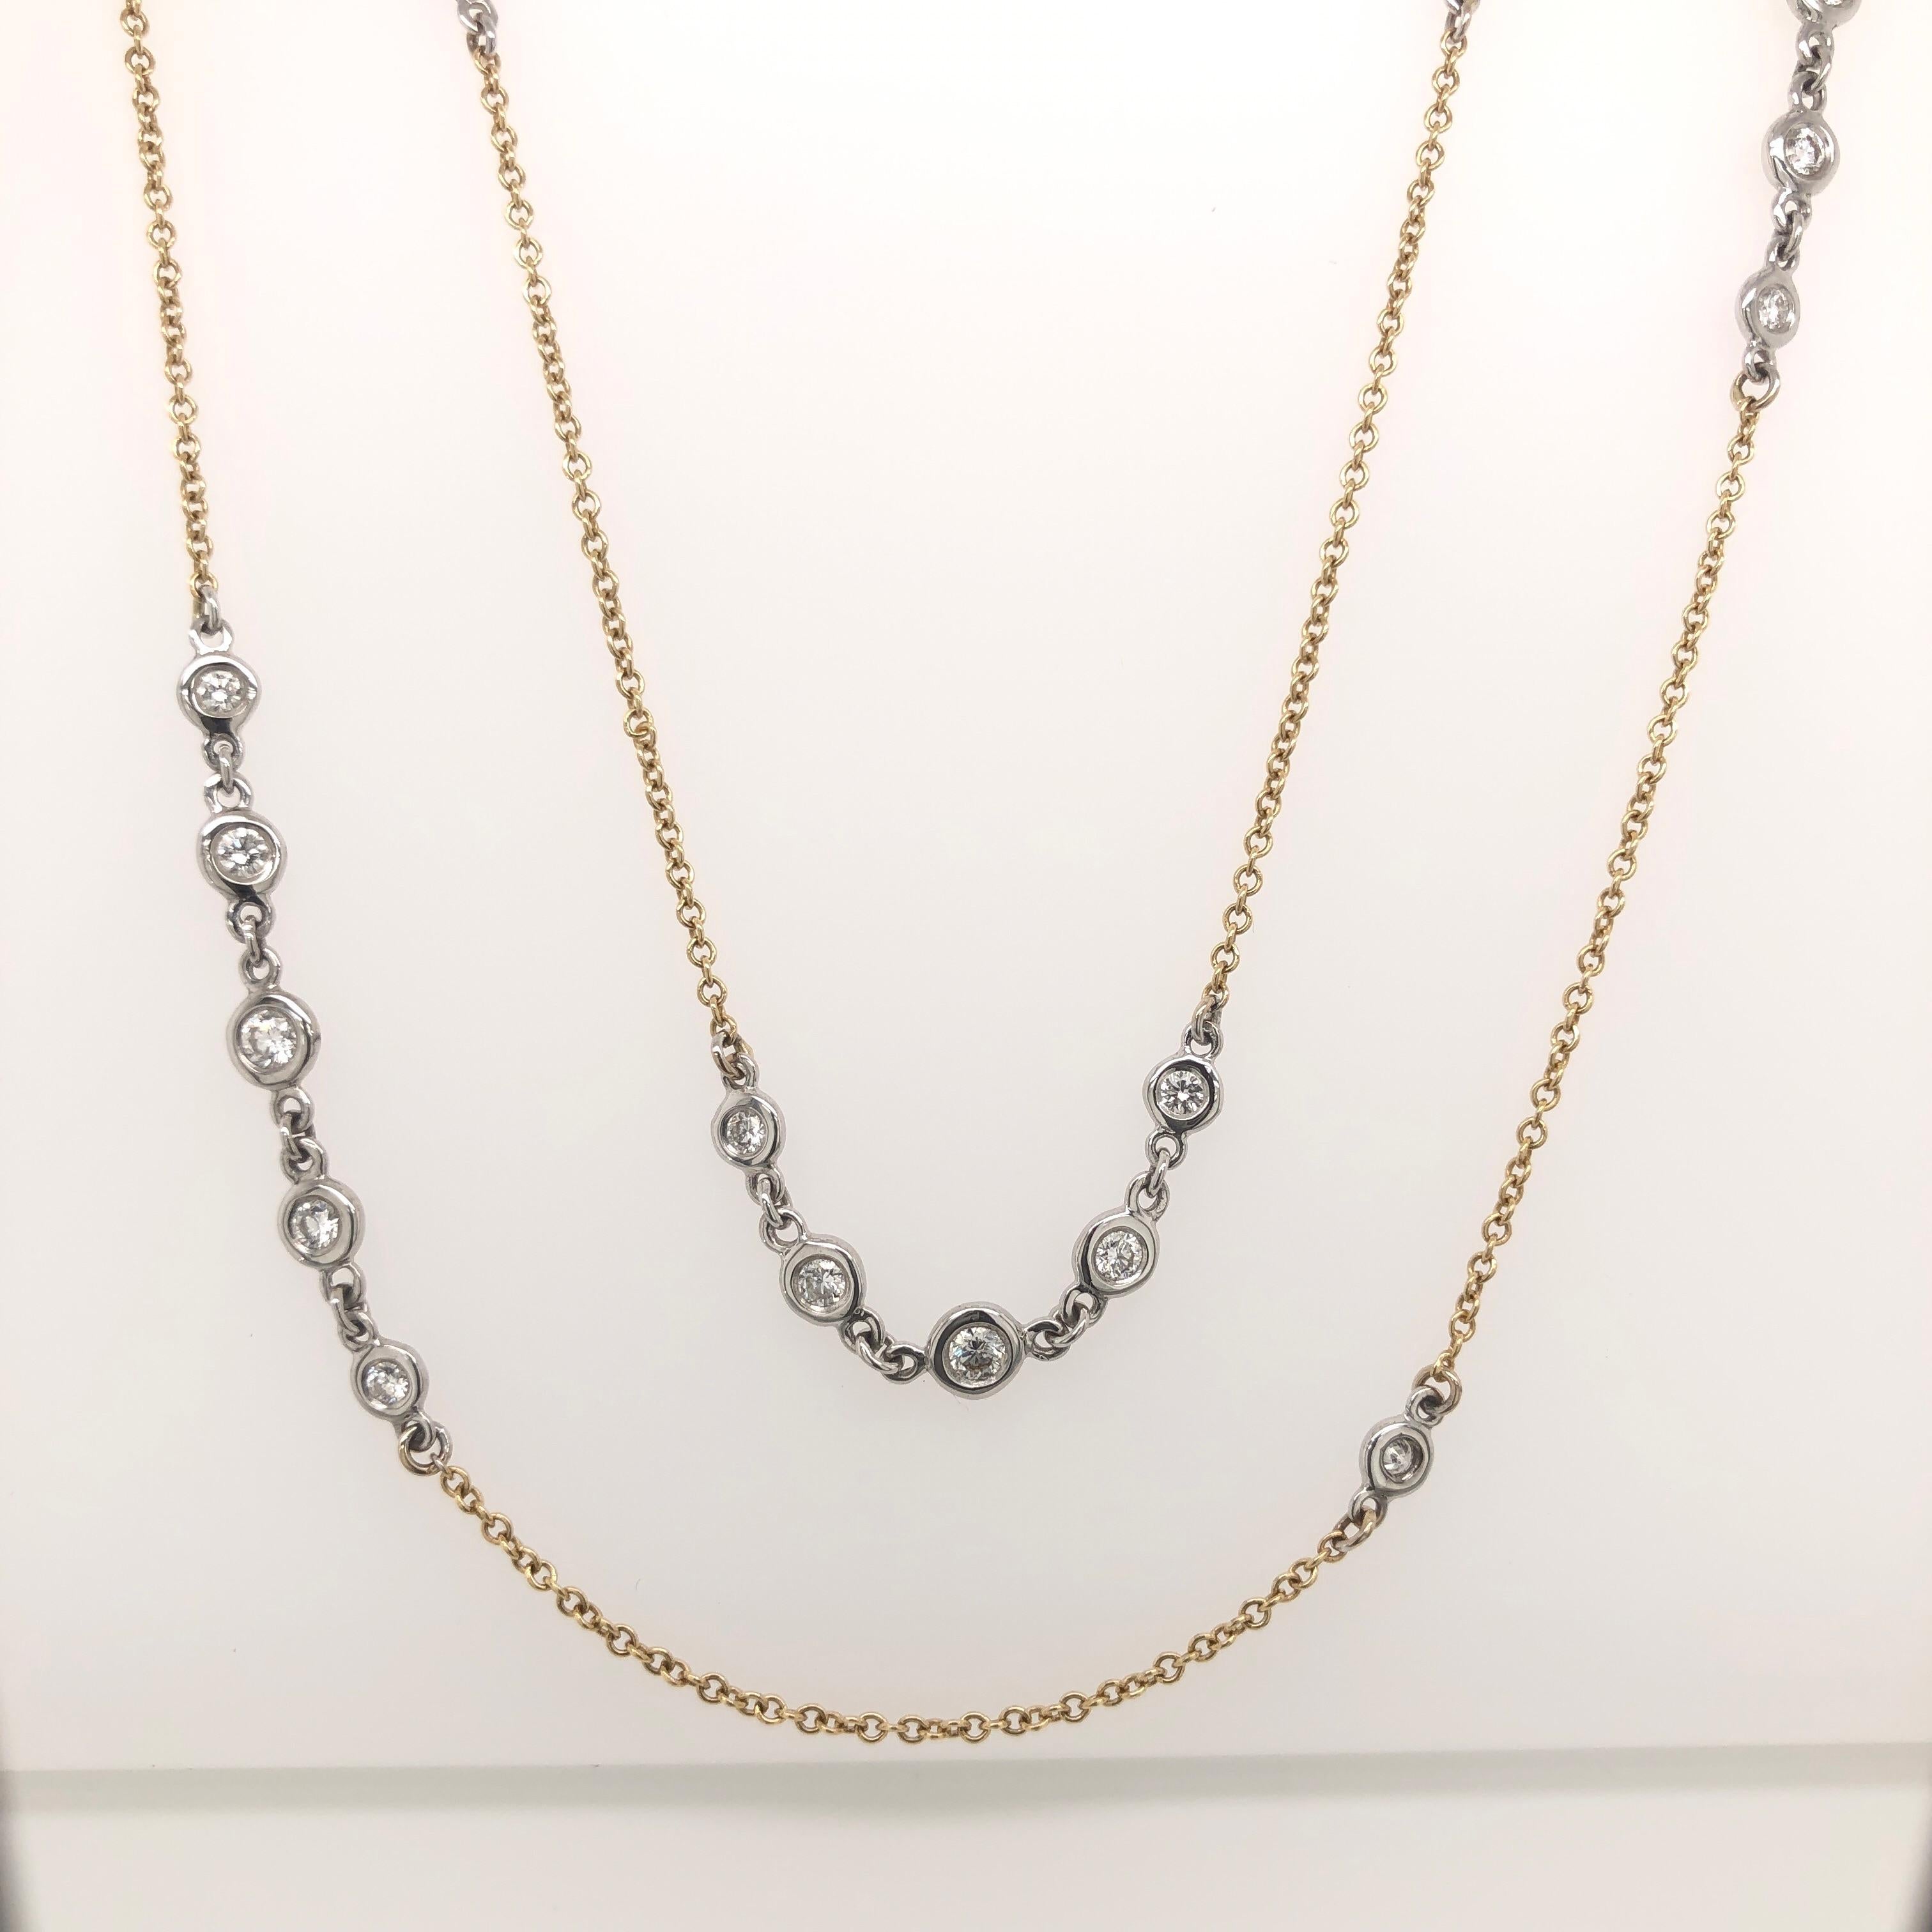 A Link Two Tone Necklace Diamond Chain set in 18K White and Yellow Gold.  Wear this Diamond chain long or doubled.  This Necklace is so versatile.  The necklace has 41 Round Brilliant Diamonds bezel set in White gold creating a super brilliant